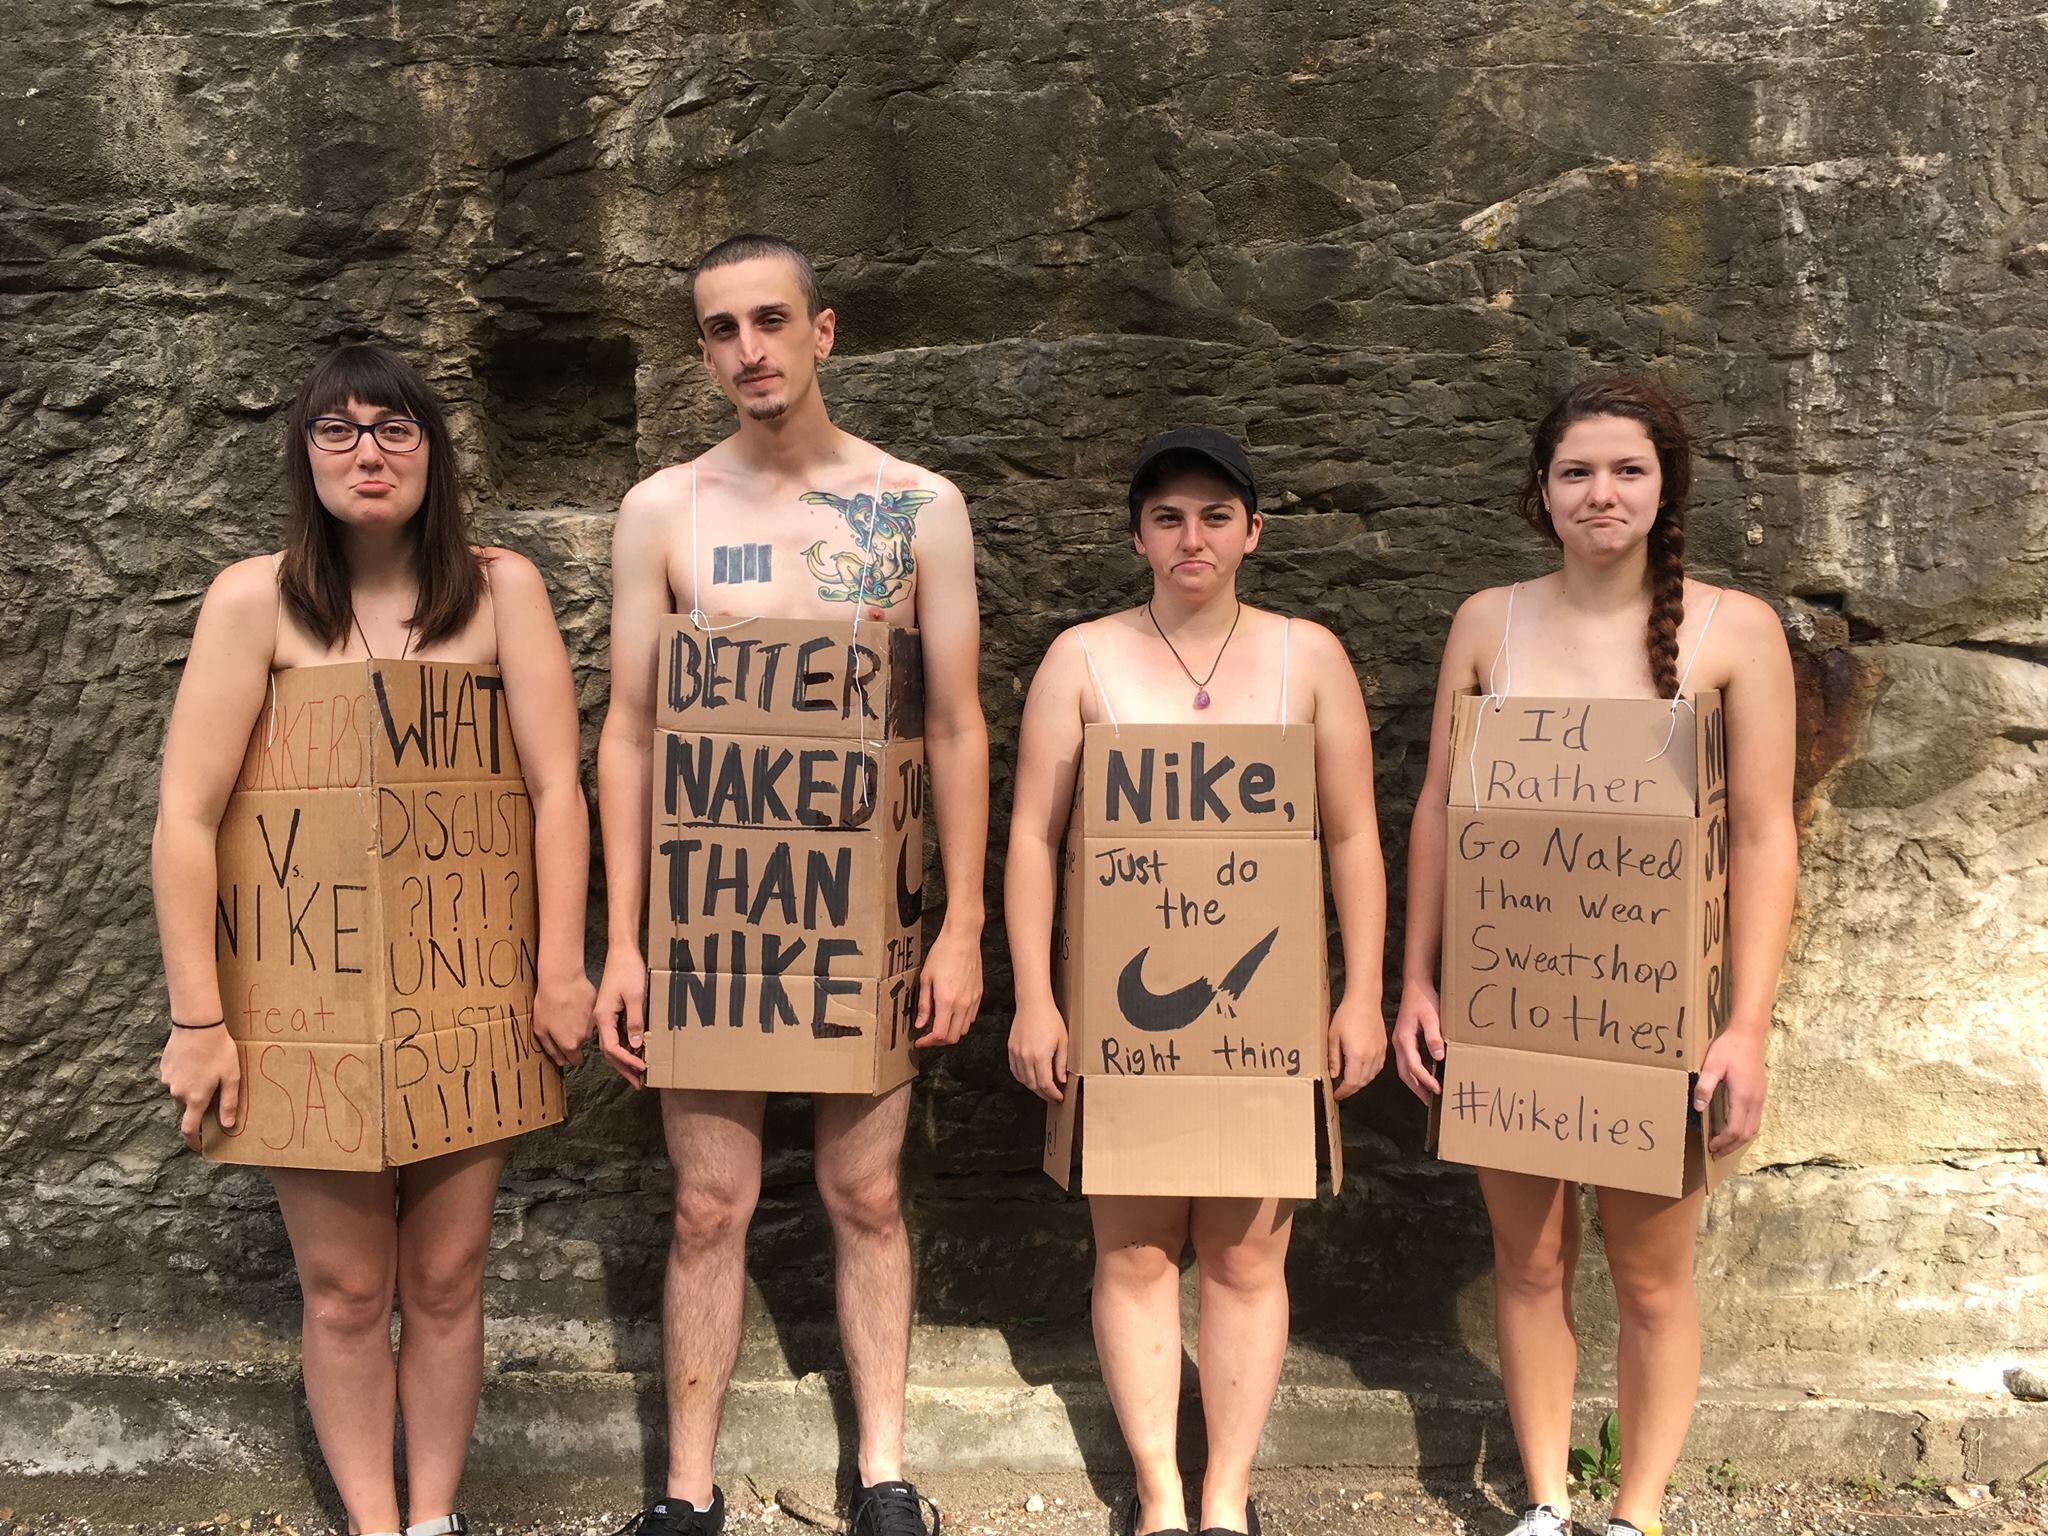 on Twitter: of @KentStateCHANGE would rather go naked at @Nike Aurora, OH than buy #NikeLies! https://t.co/LZGPQ3Q2MO" / Twitter